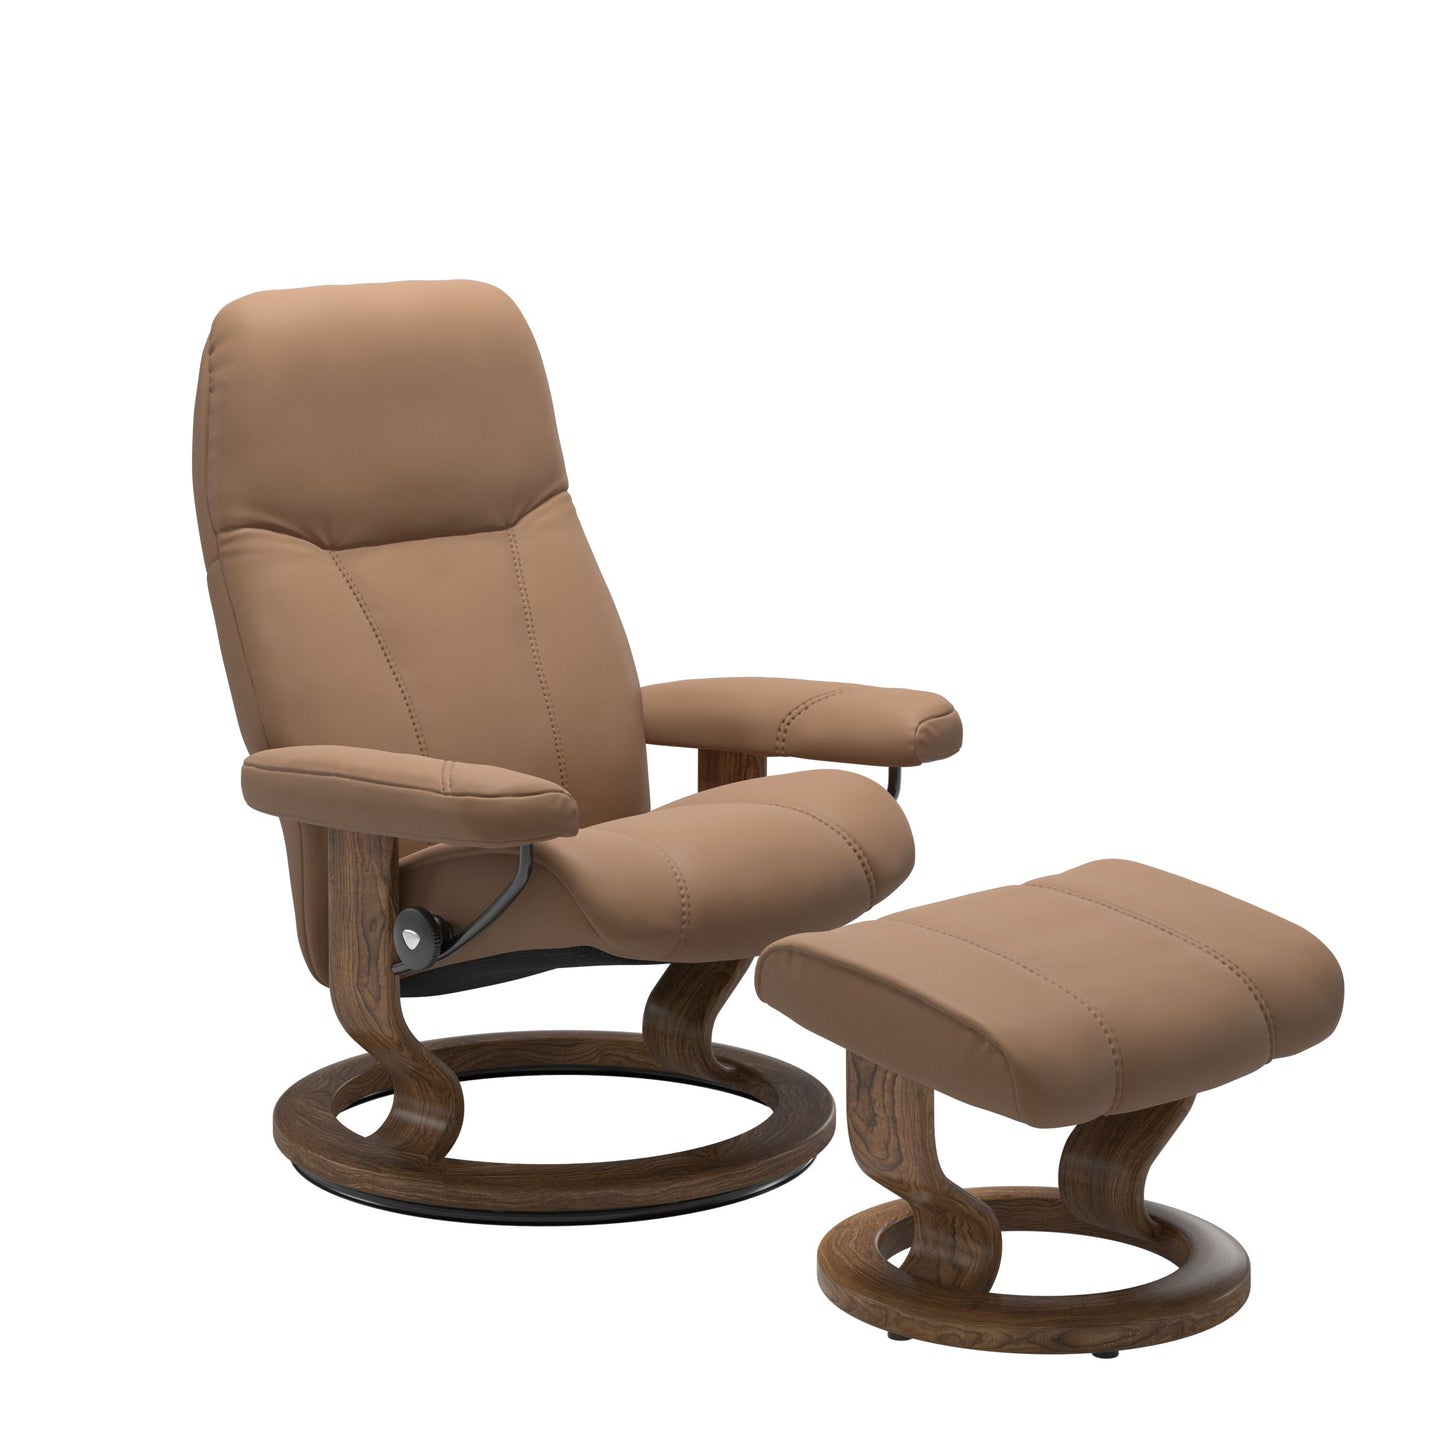 Consul Medium Recliner Chair & Stool Classic Base by Stressless